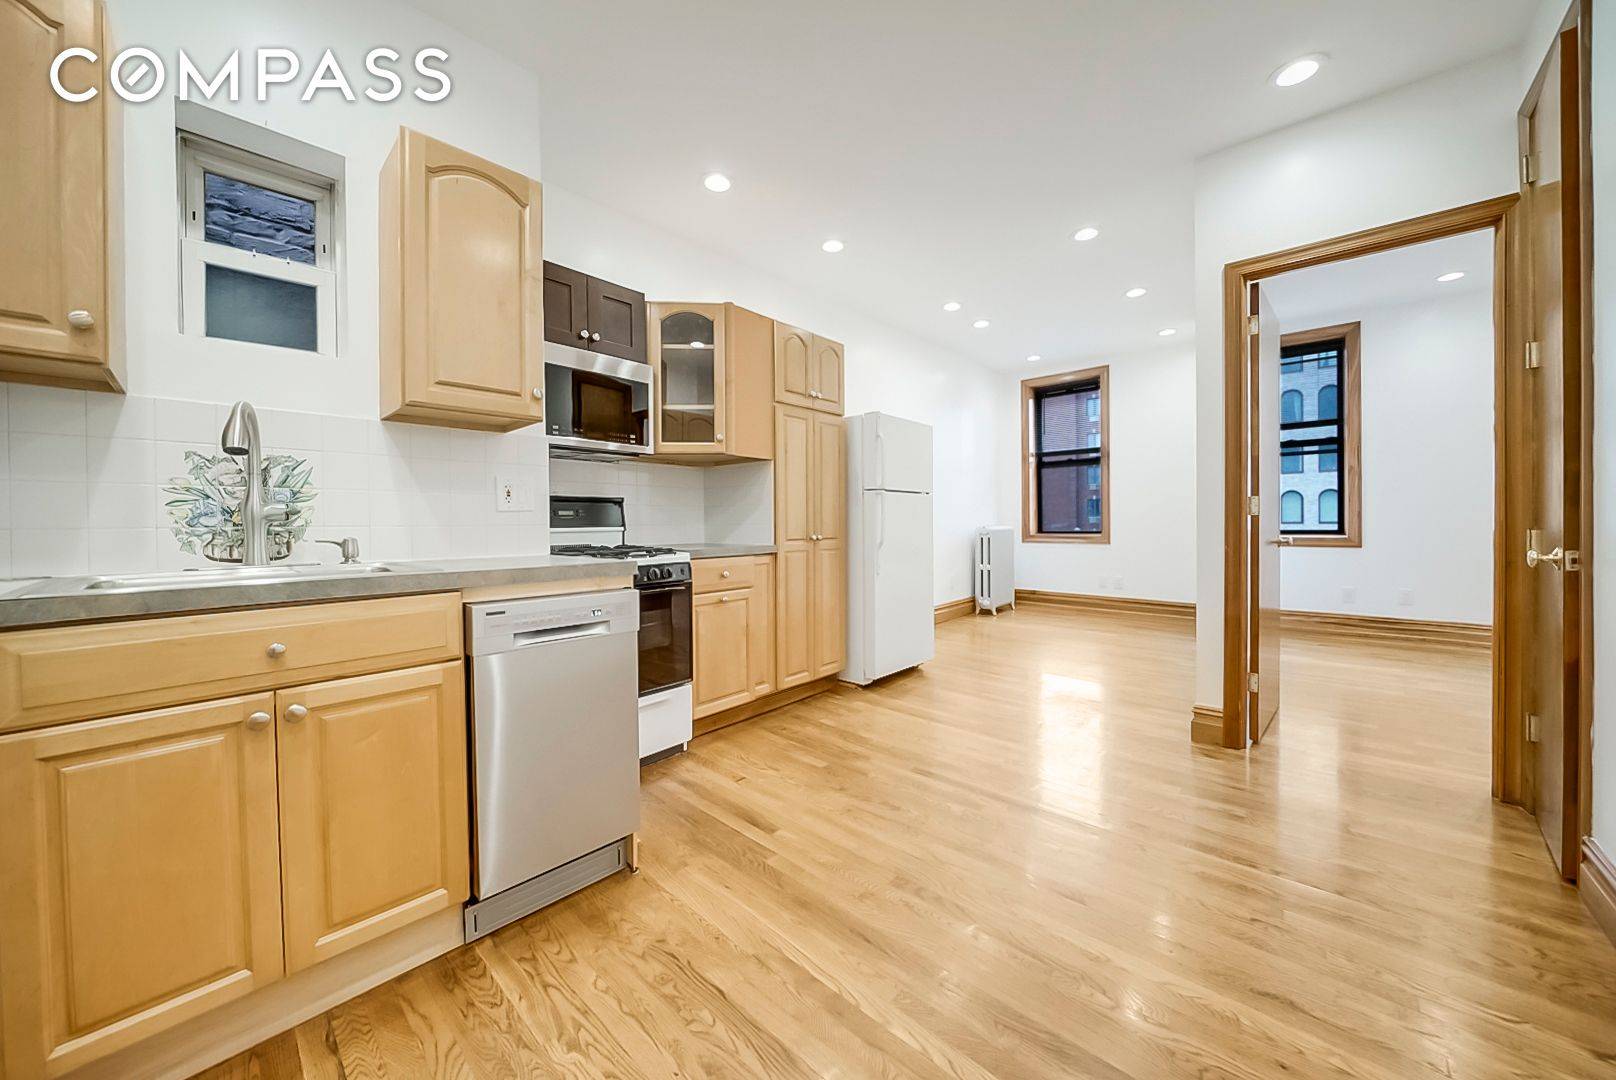 Prime Park Slope, real 3 bedroom with great natural sunlight and tons of closets.